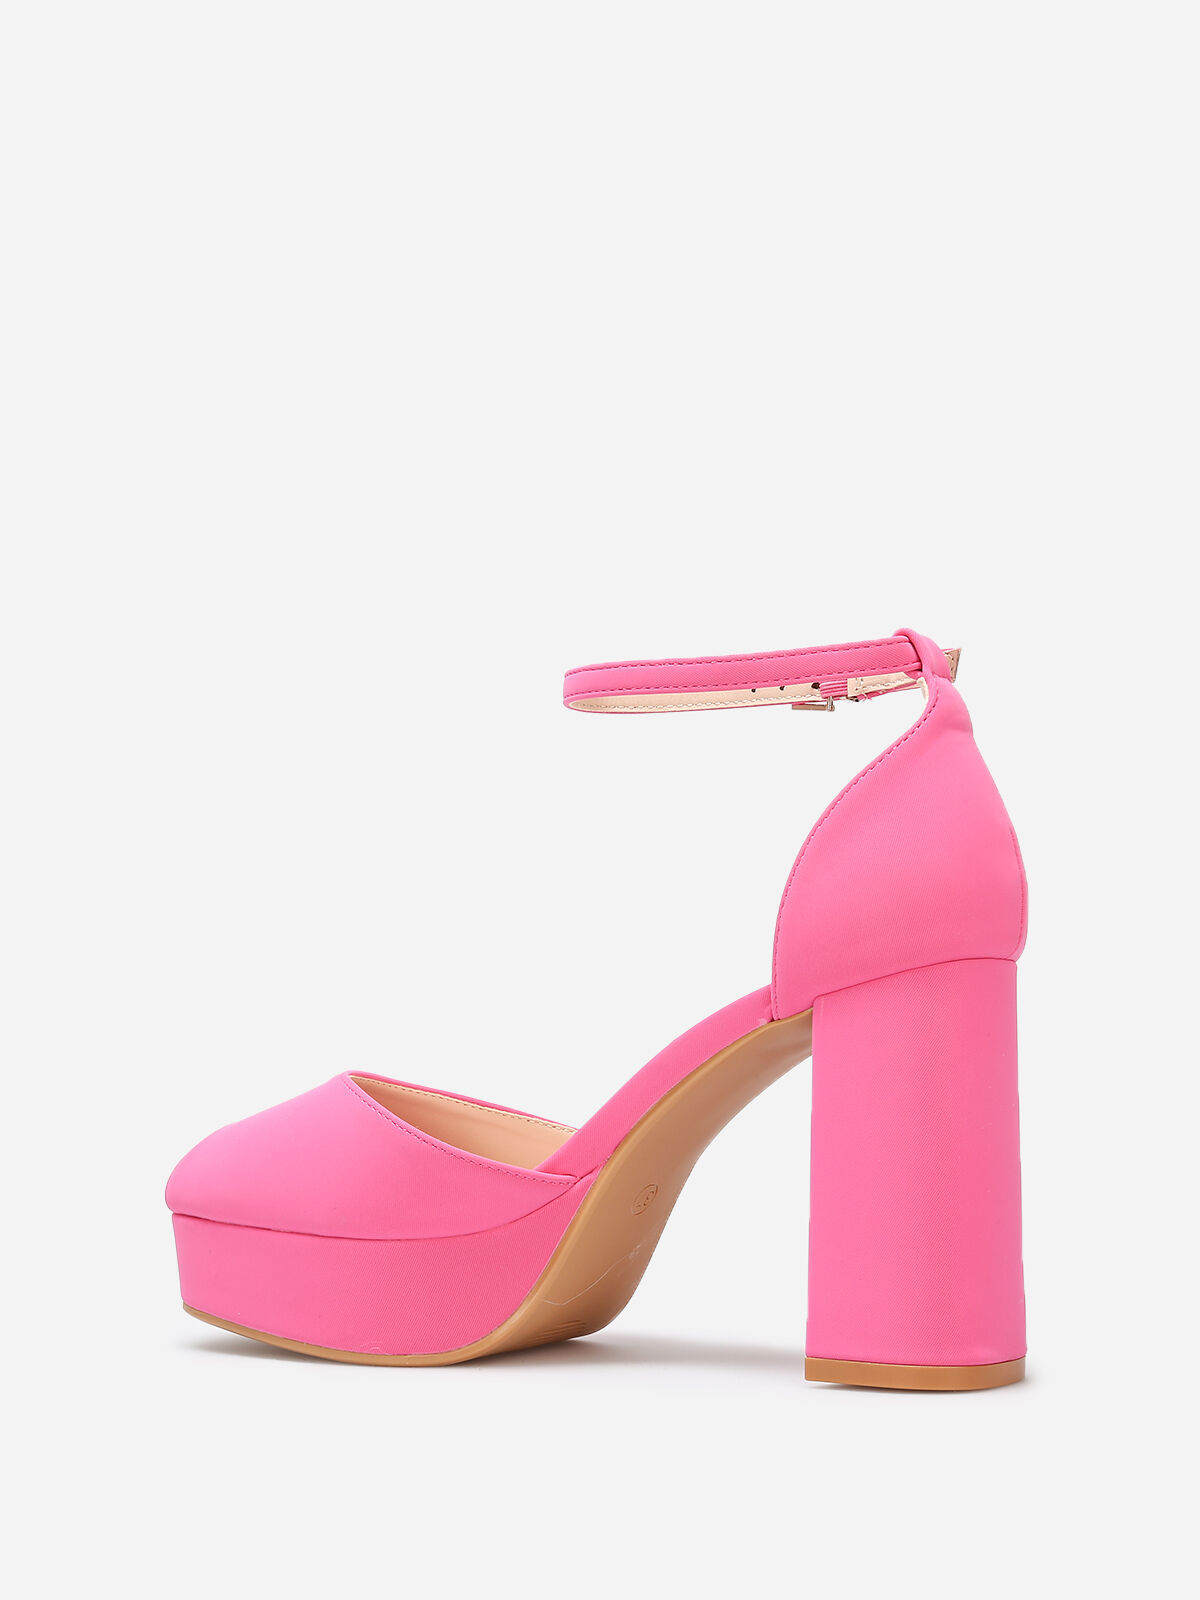 Pompe "Peep toes" con plateau image number 2